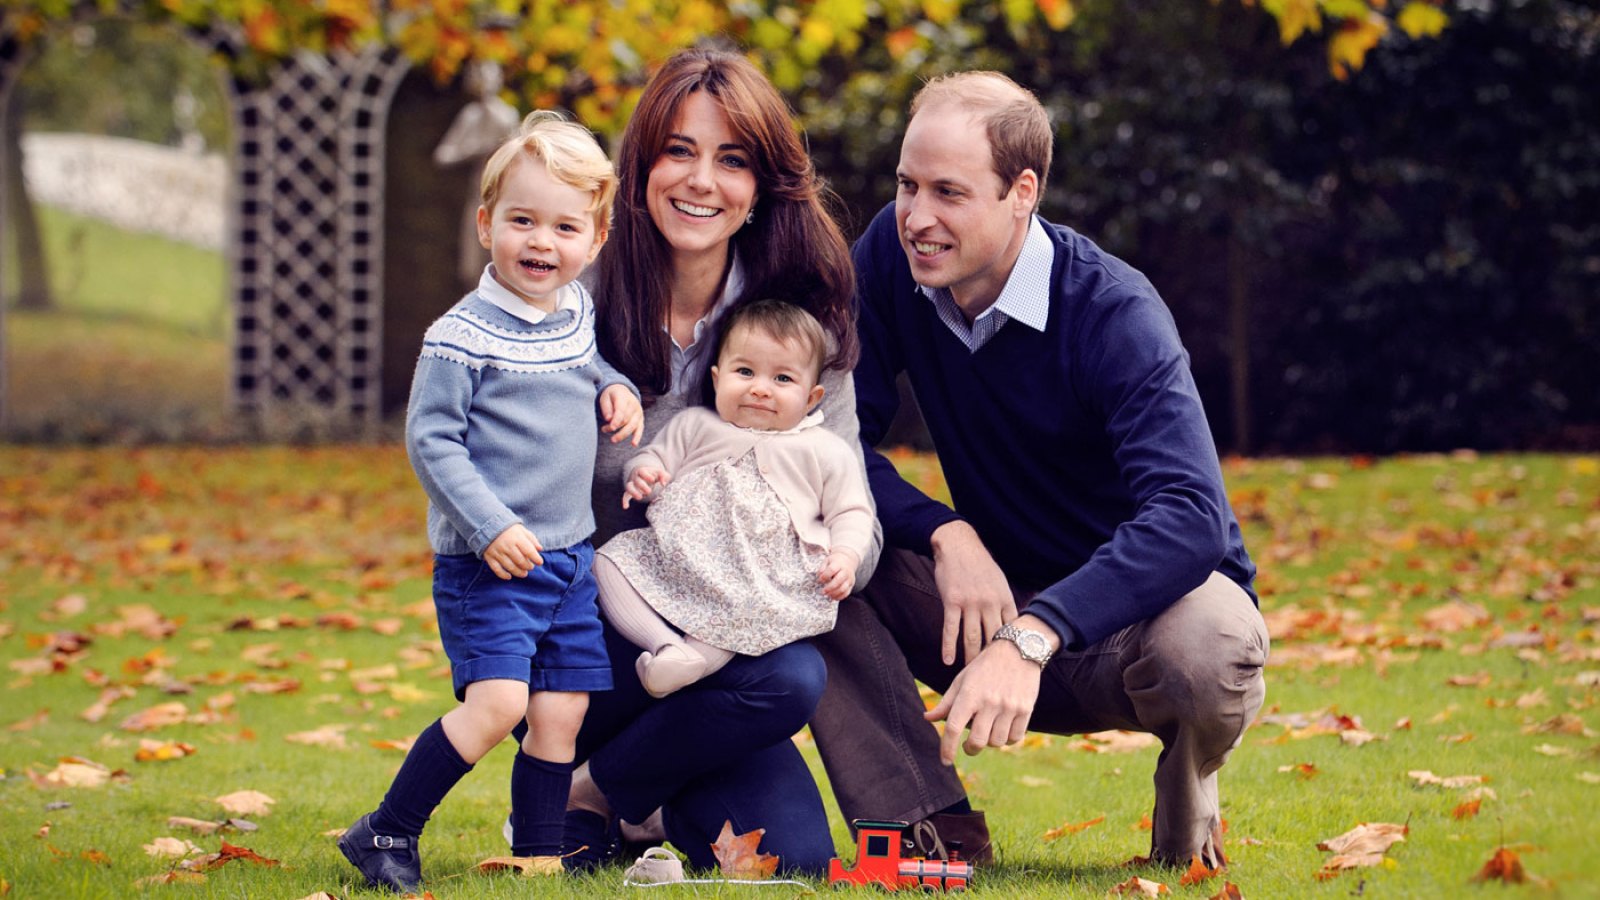 Prince William, Duke of Cambridge and Catherine, Duchess of Cambridge with their children, Prince George and Princess Charlotte